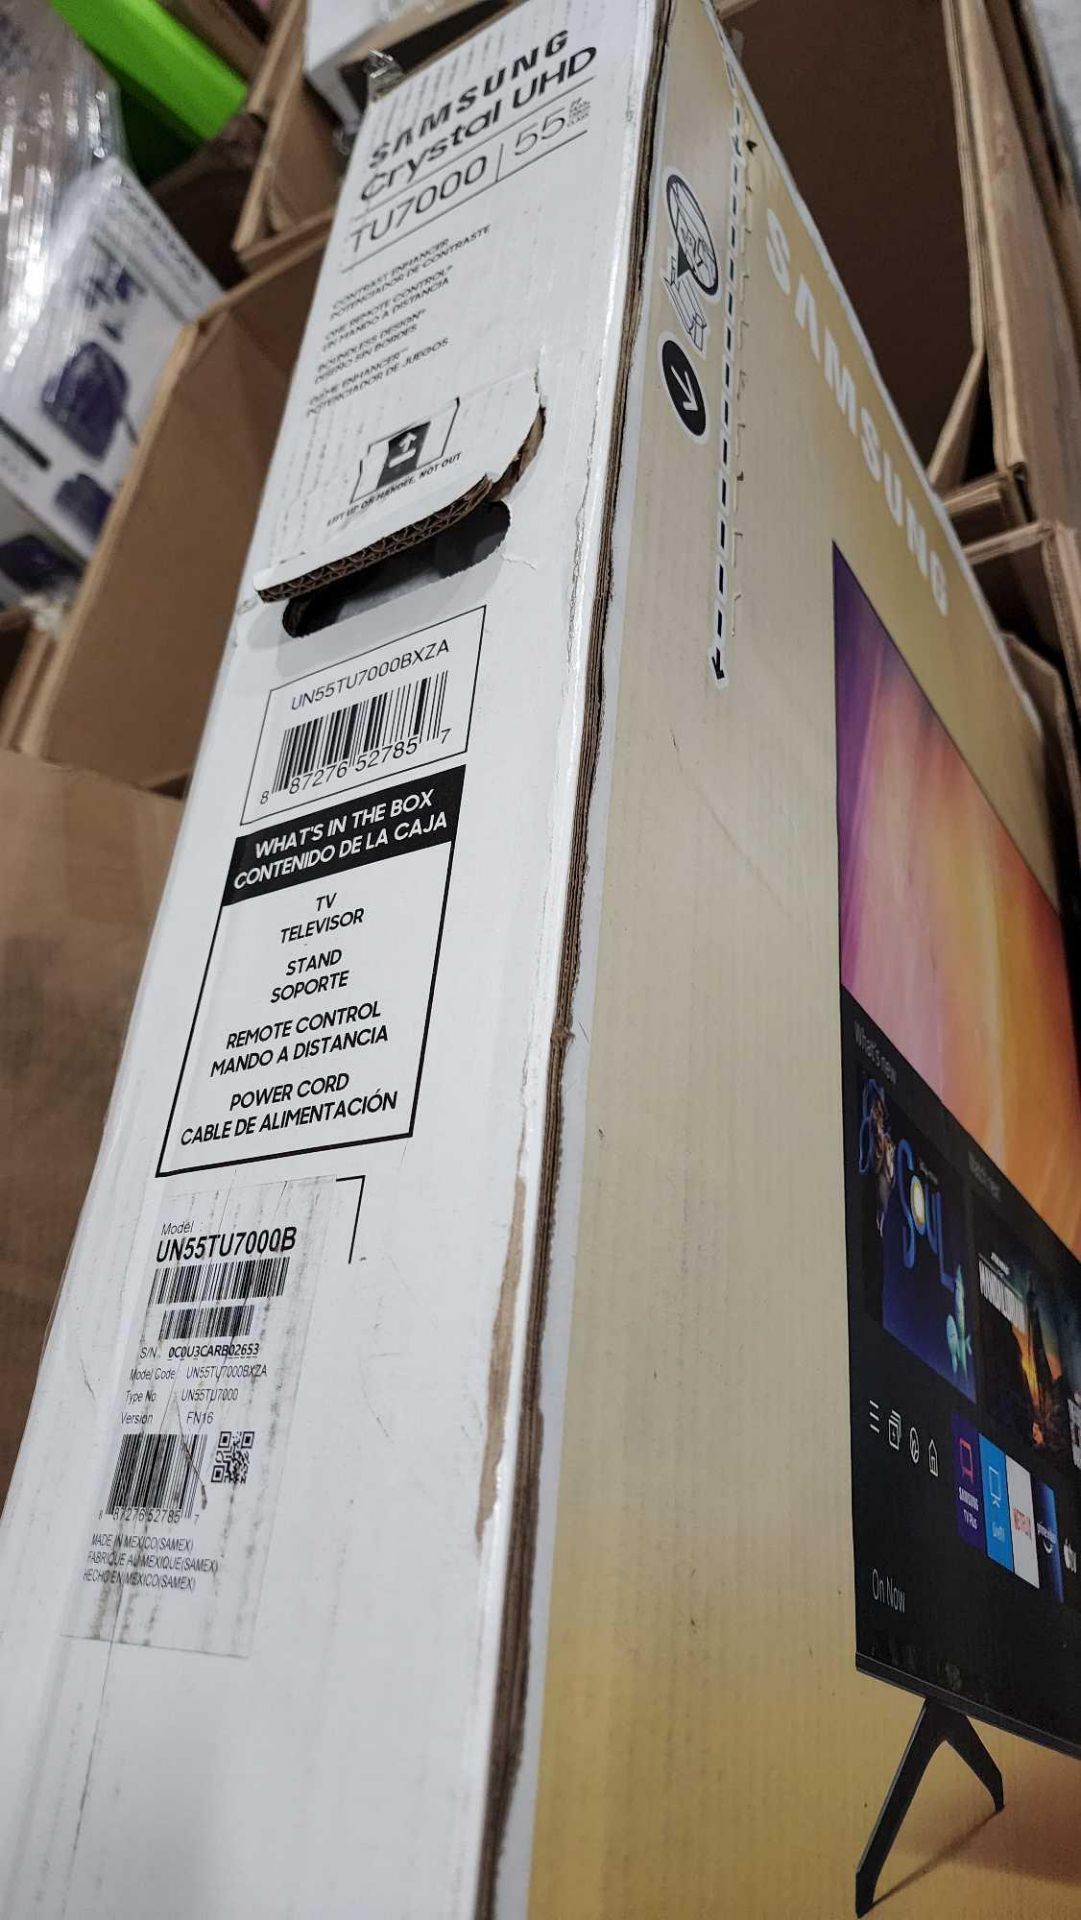 Samsung 55" TV, and more - Image 2 of 6